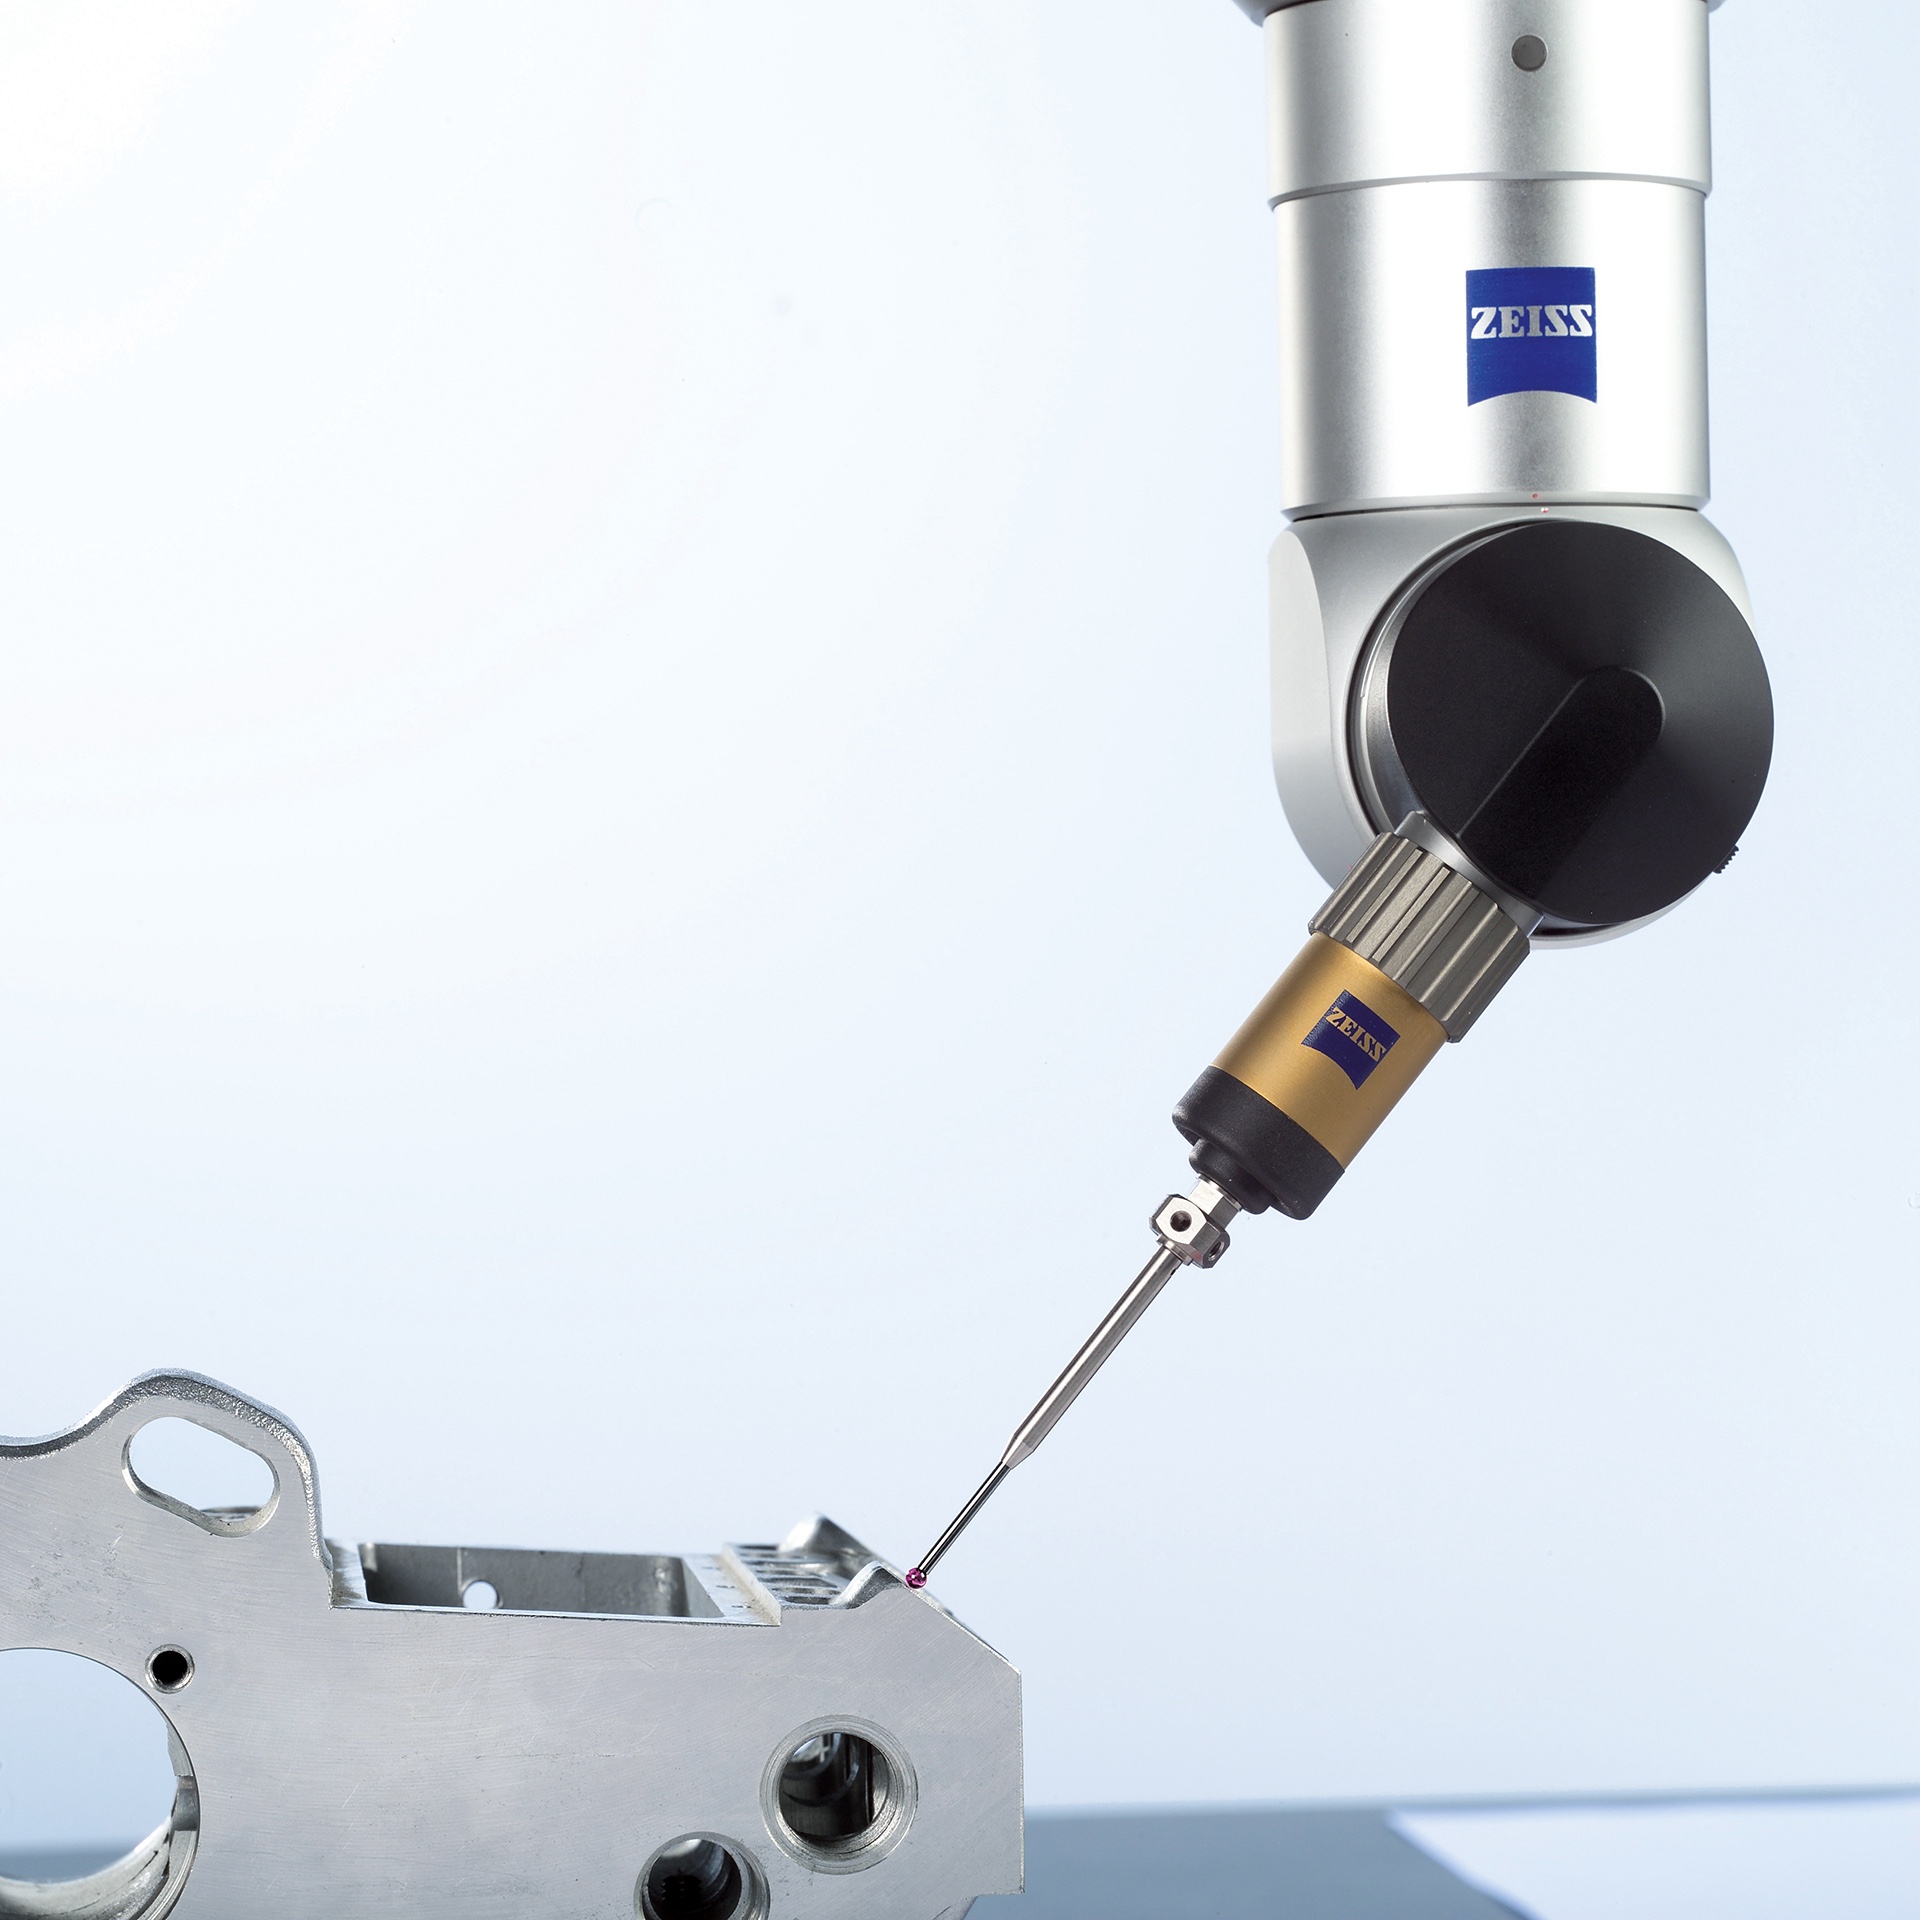 RST-P delivers the same accuracy in all probing directions